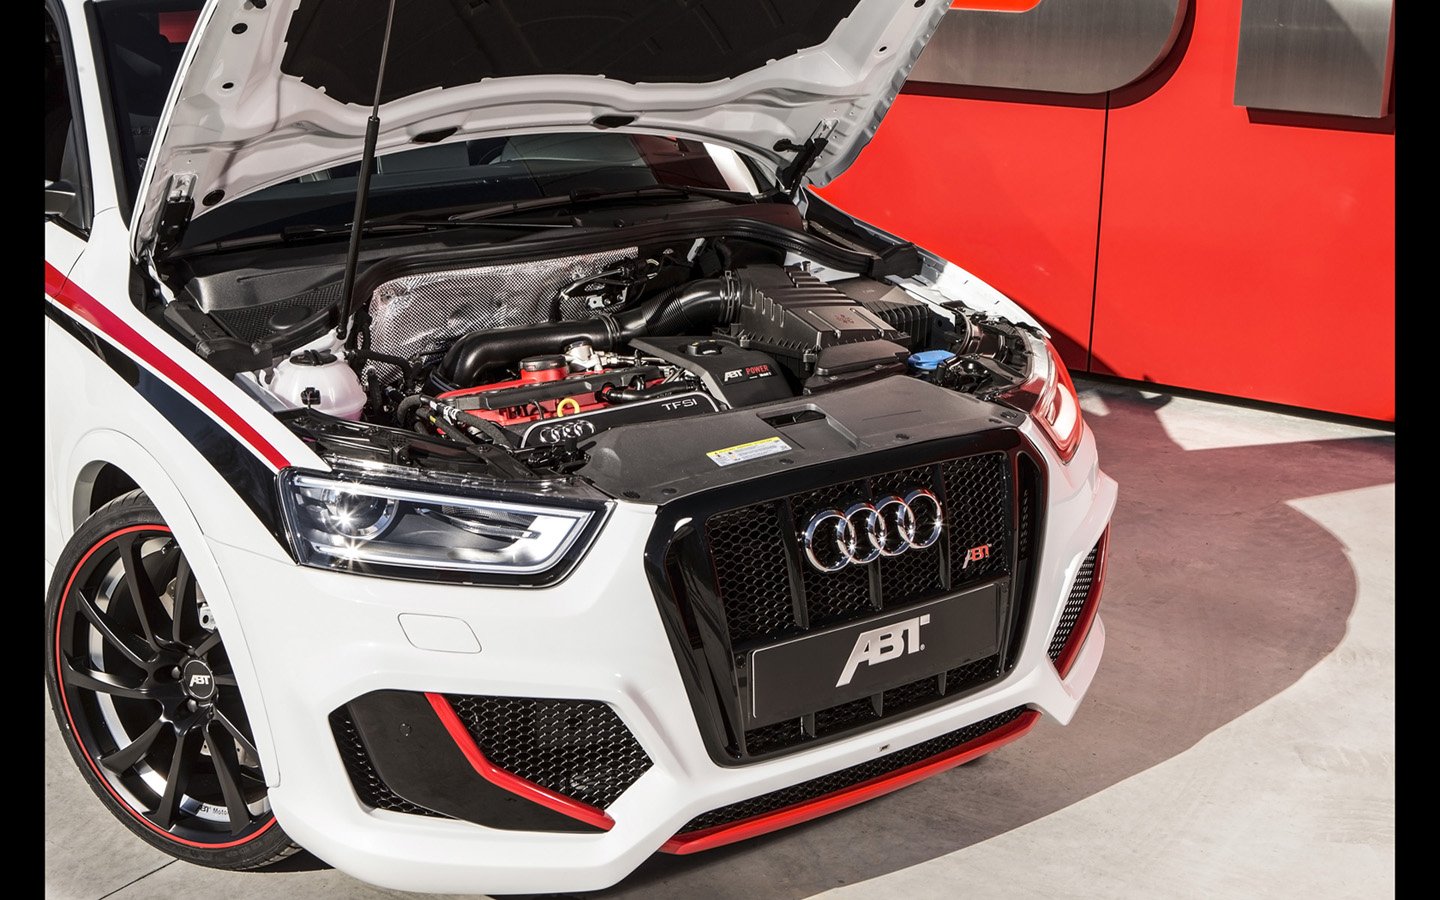 2014, Abt, Audi, Rsq3, Tuning, Engine Wallpaper